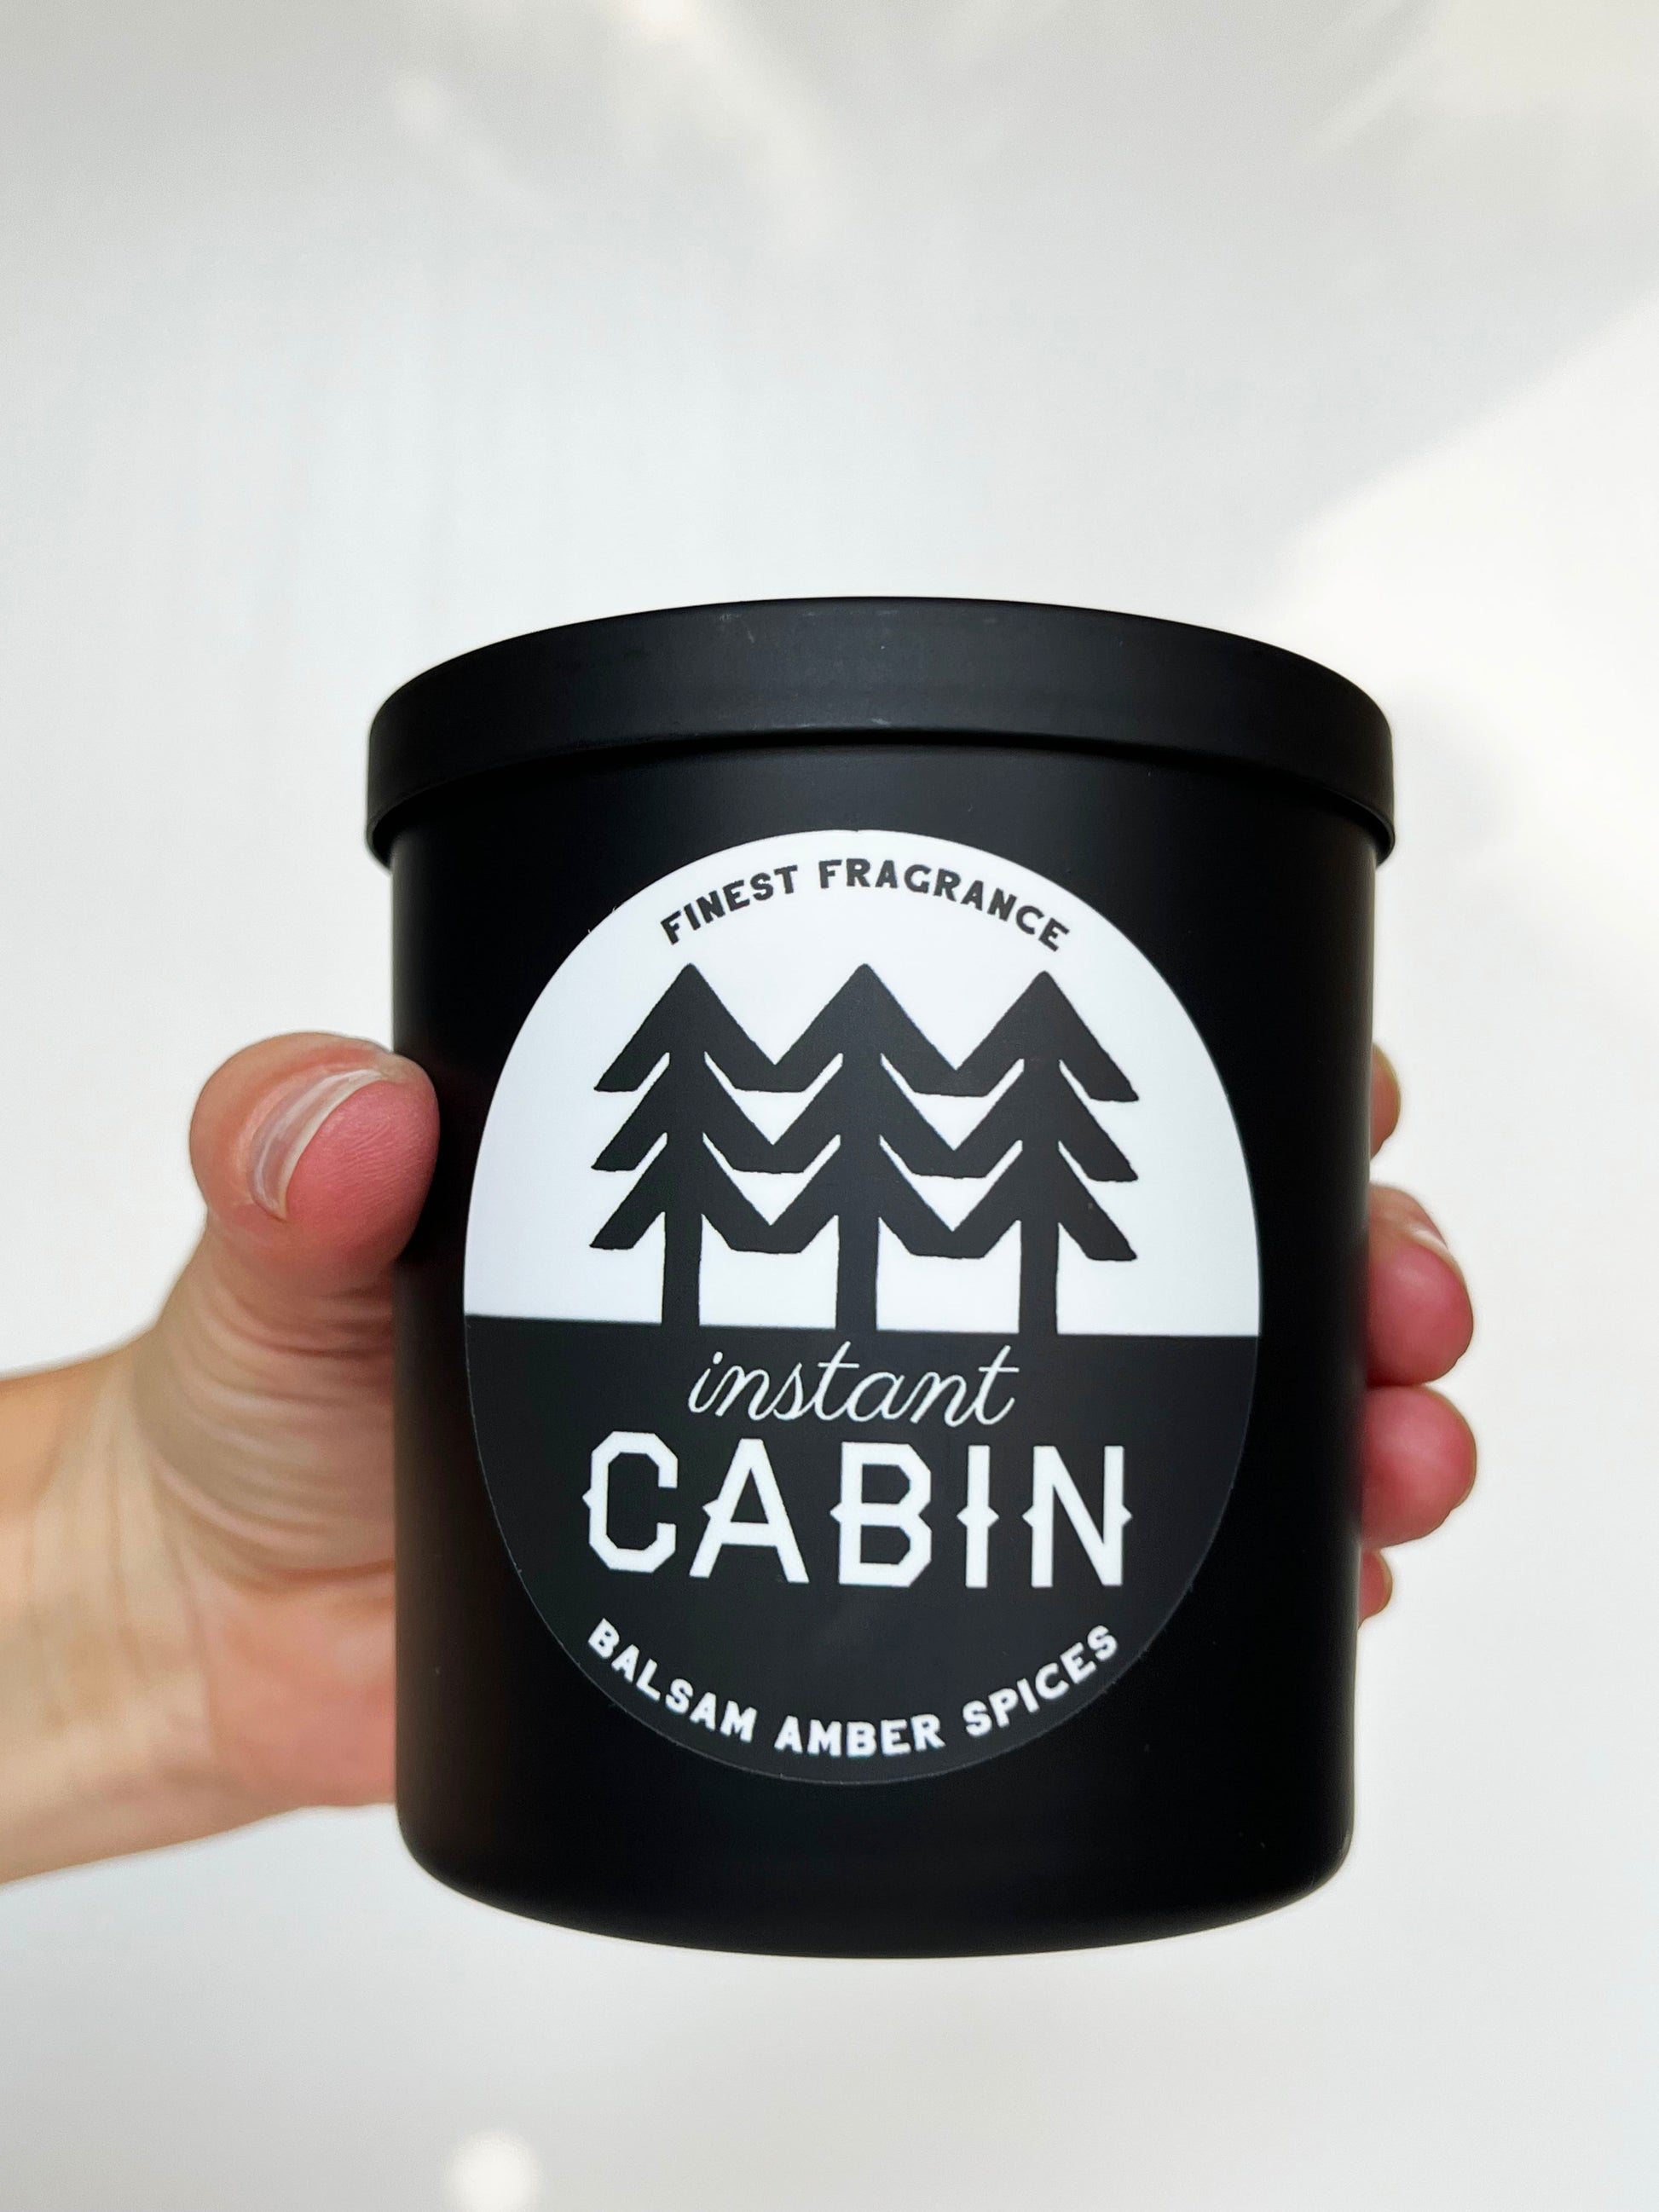 instant cabin jar candle black glass chic forest trees balsam amber spices boho modern outdoors coin laundry 